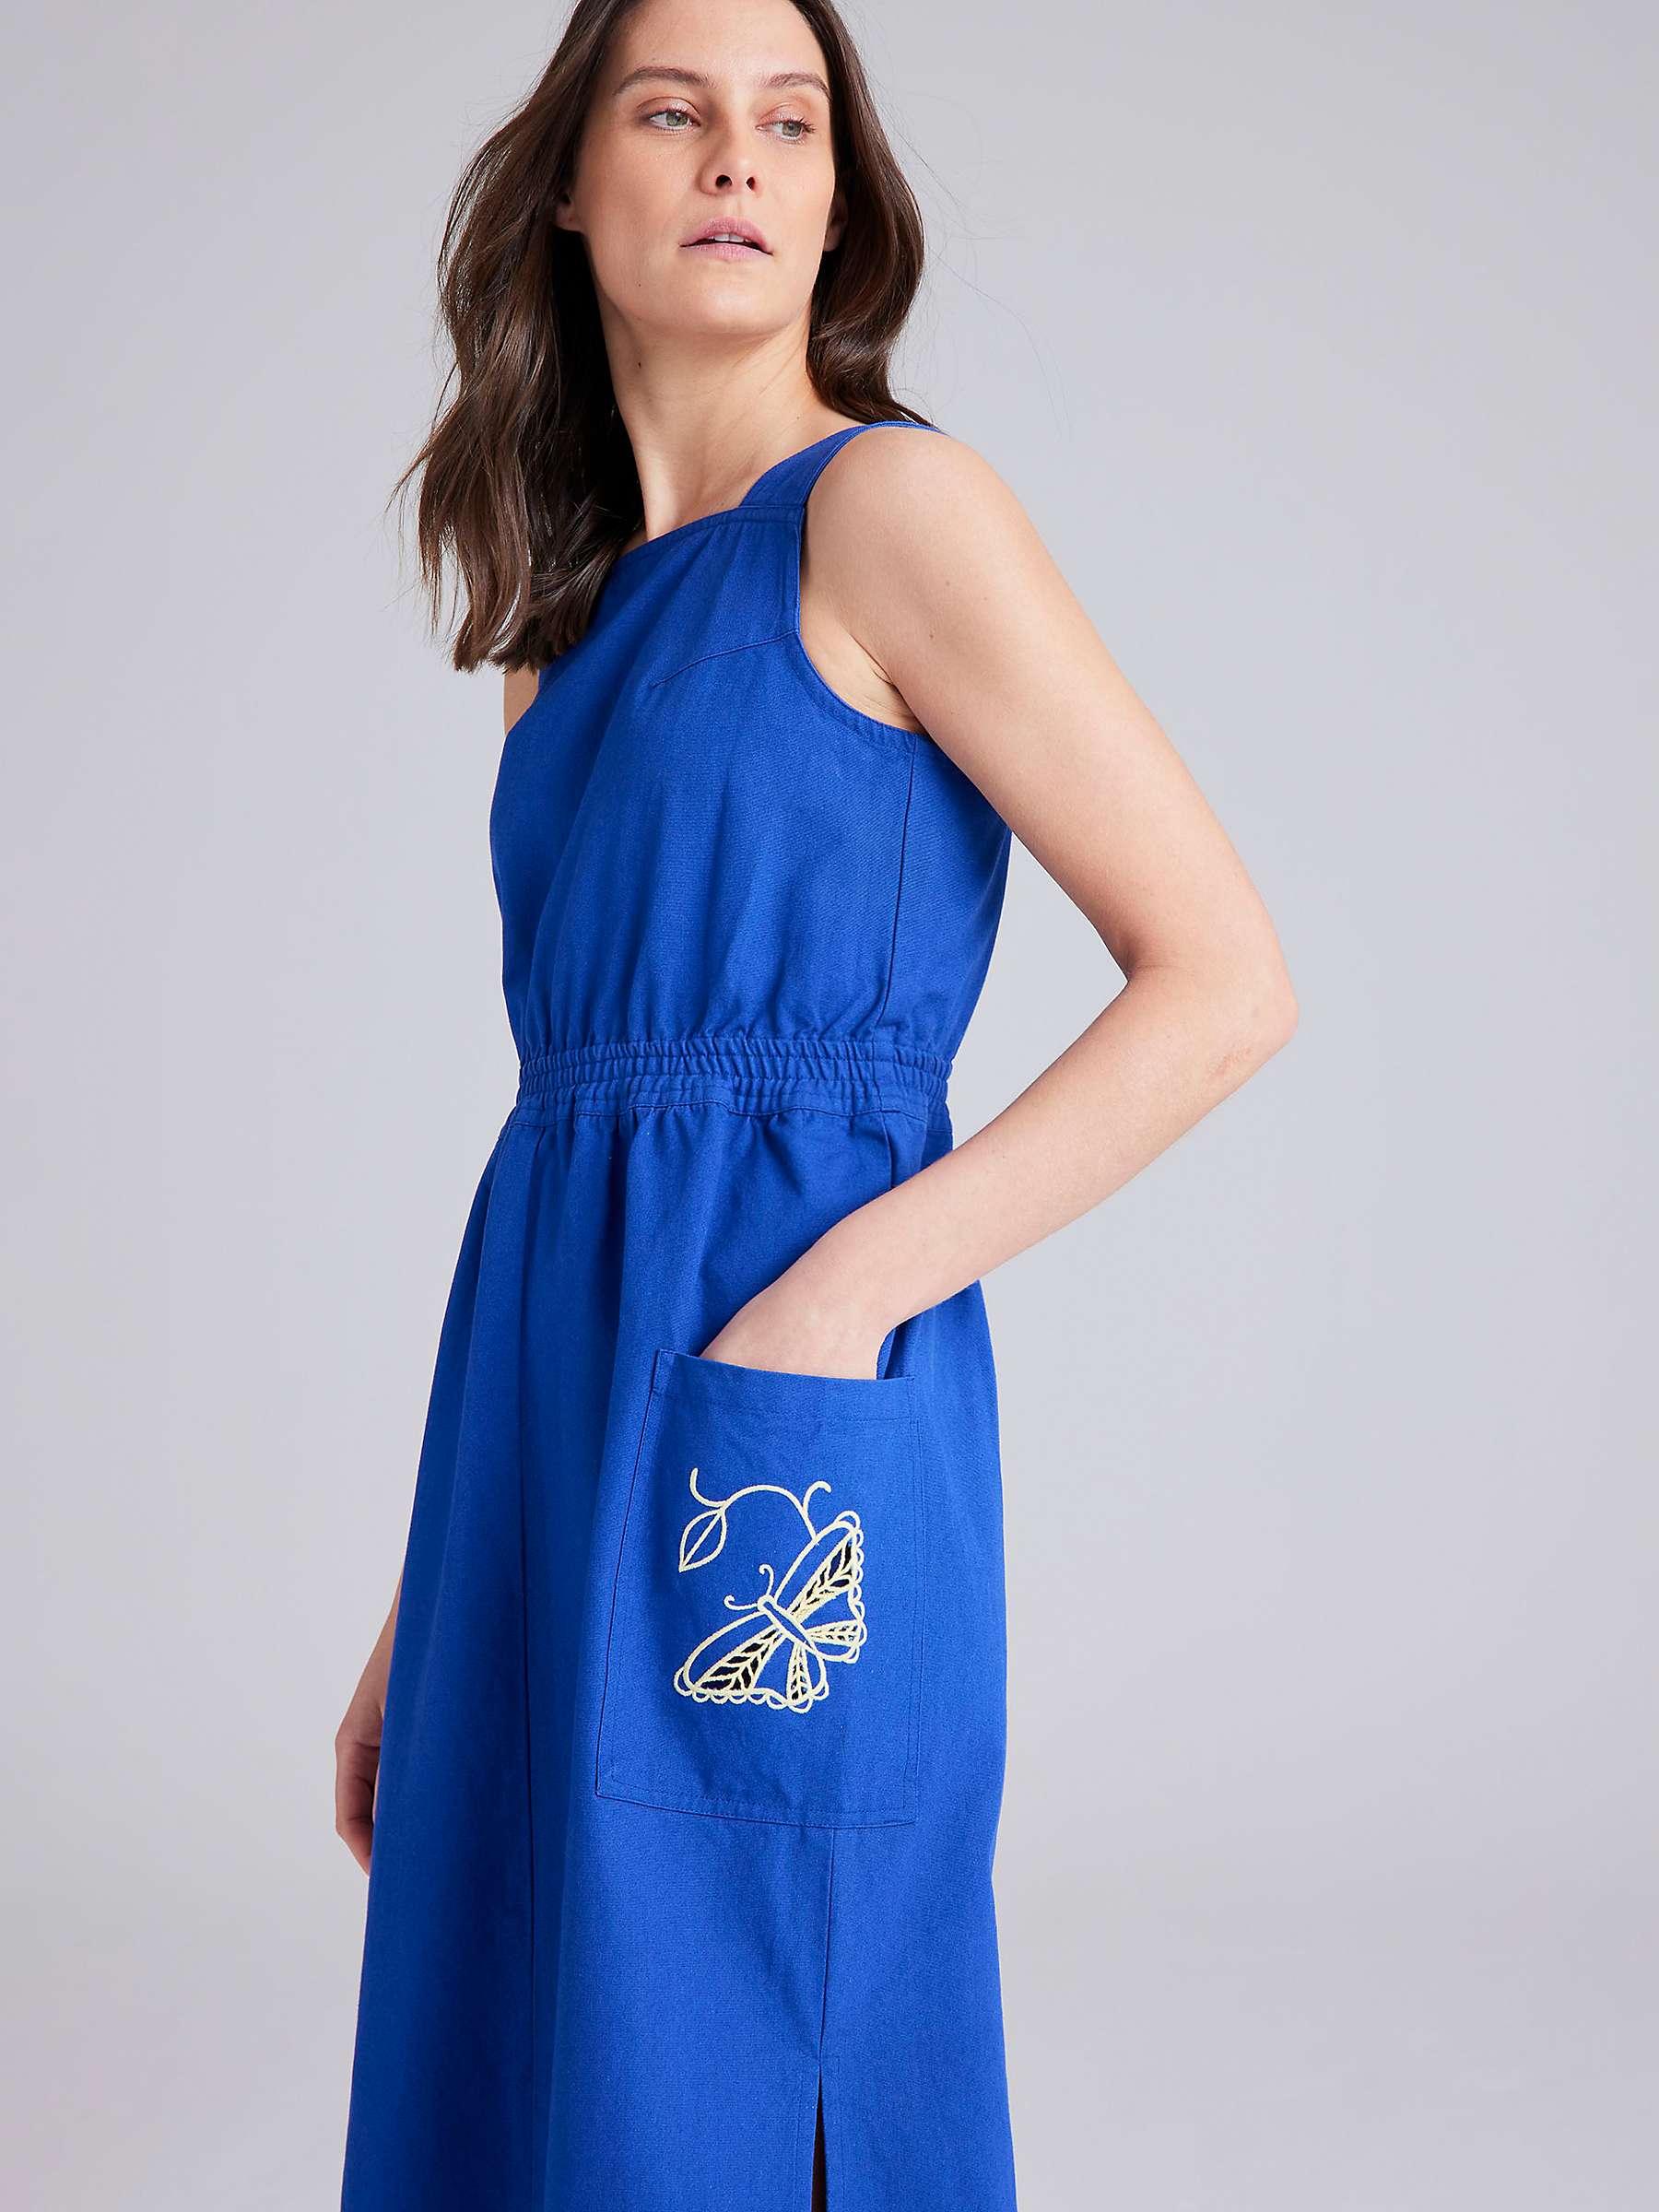 Buy Cape Cove Botanical Butterfly Sleeveless Cotton Midi Dress, Blue Online at johnlewis.com